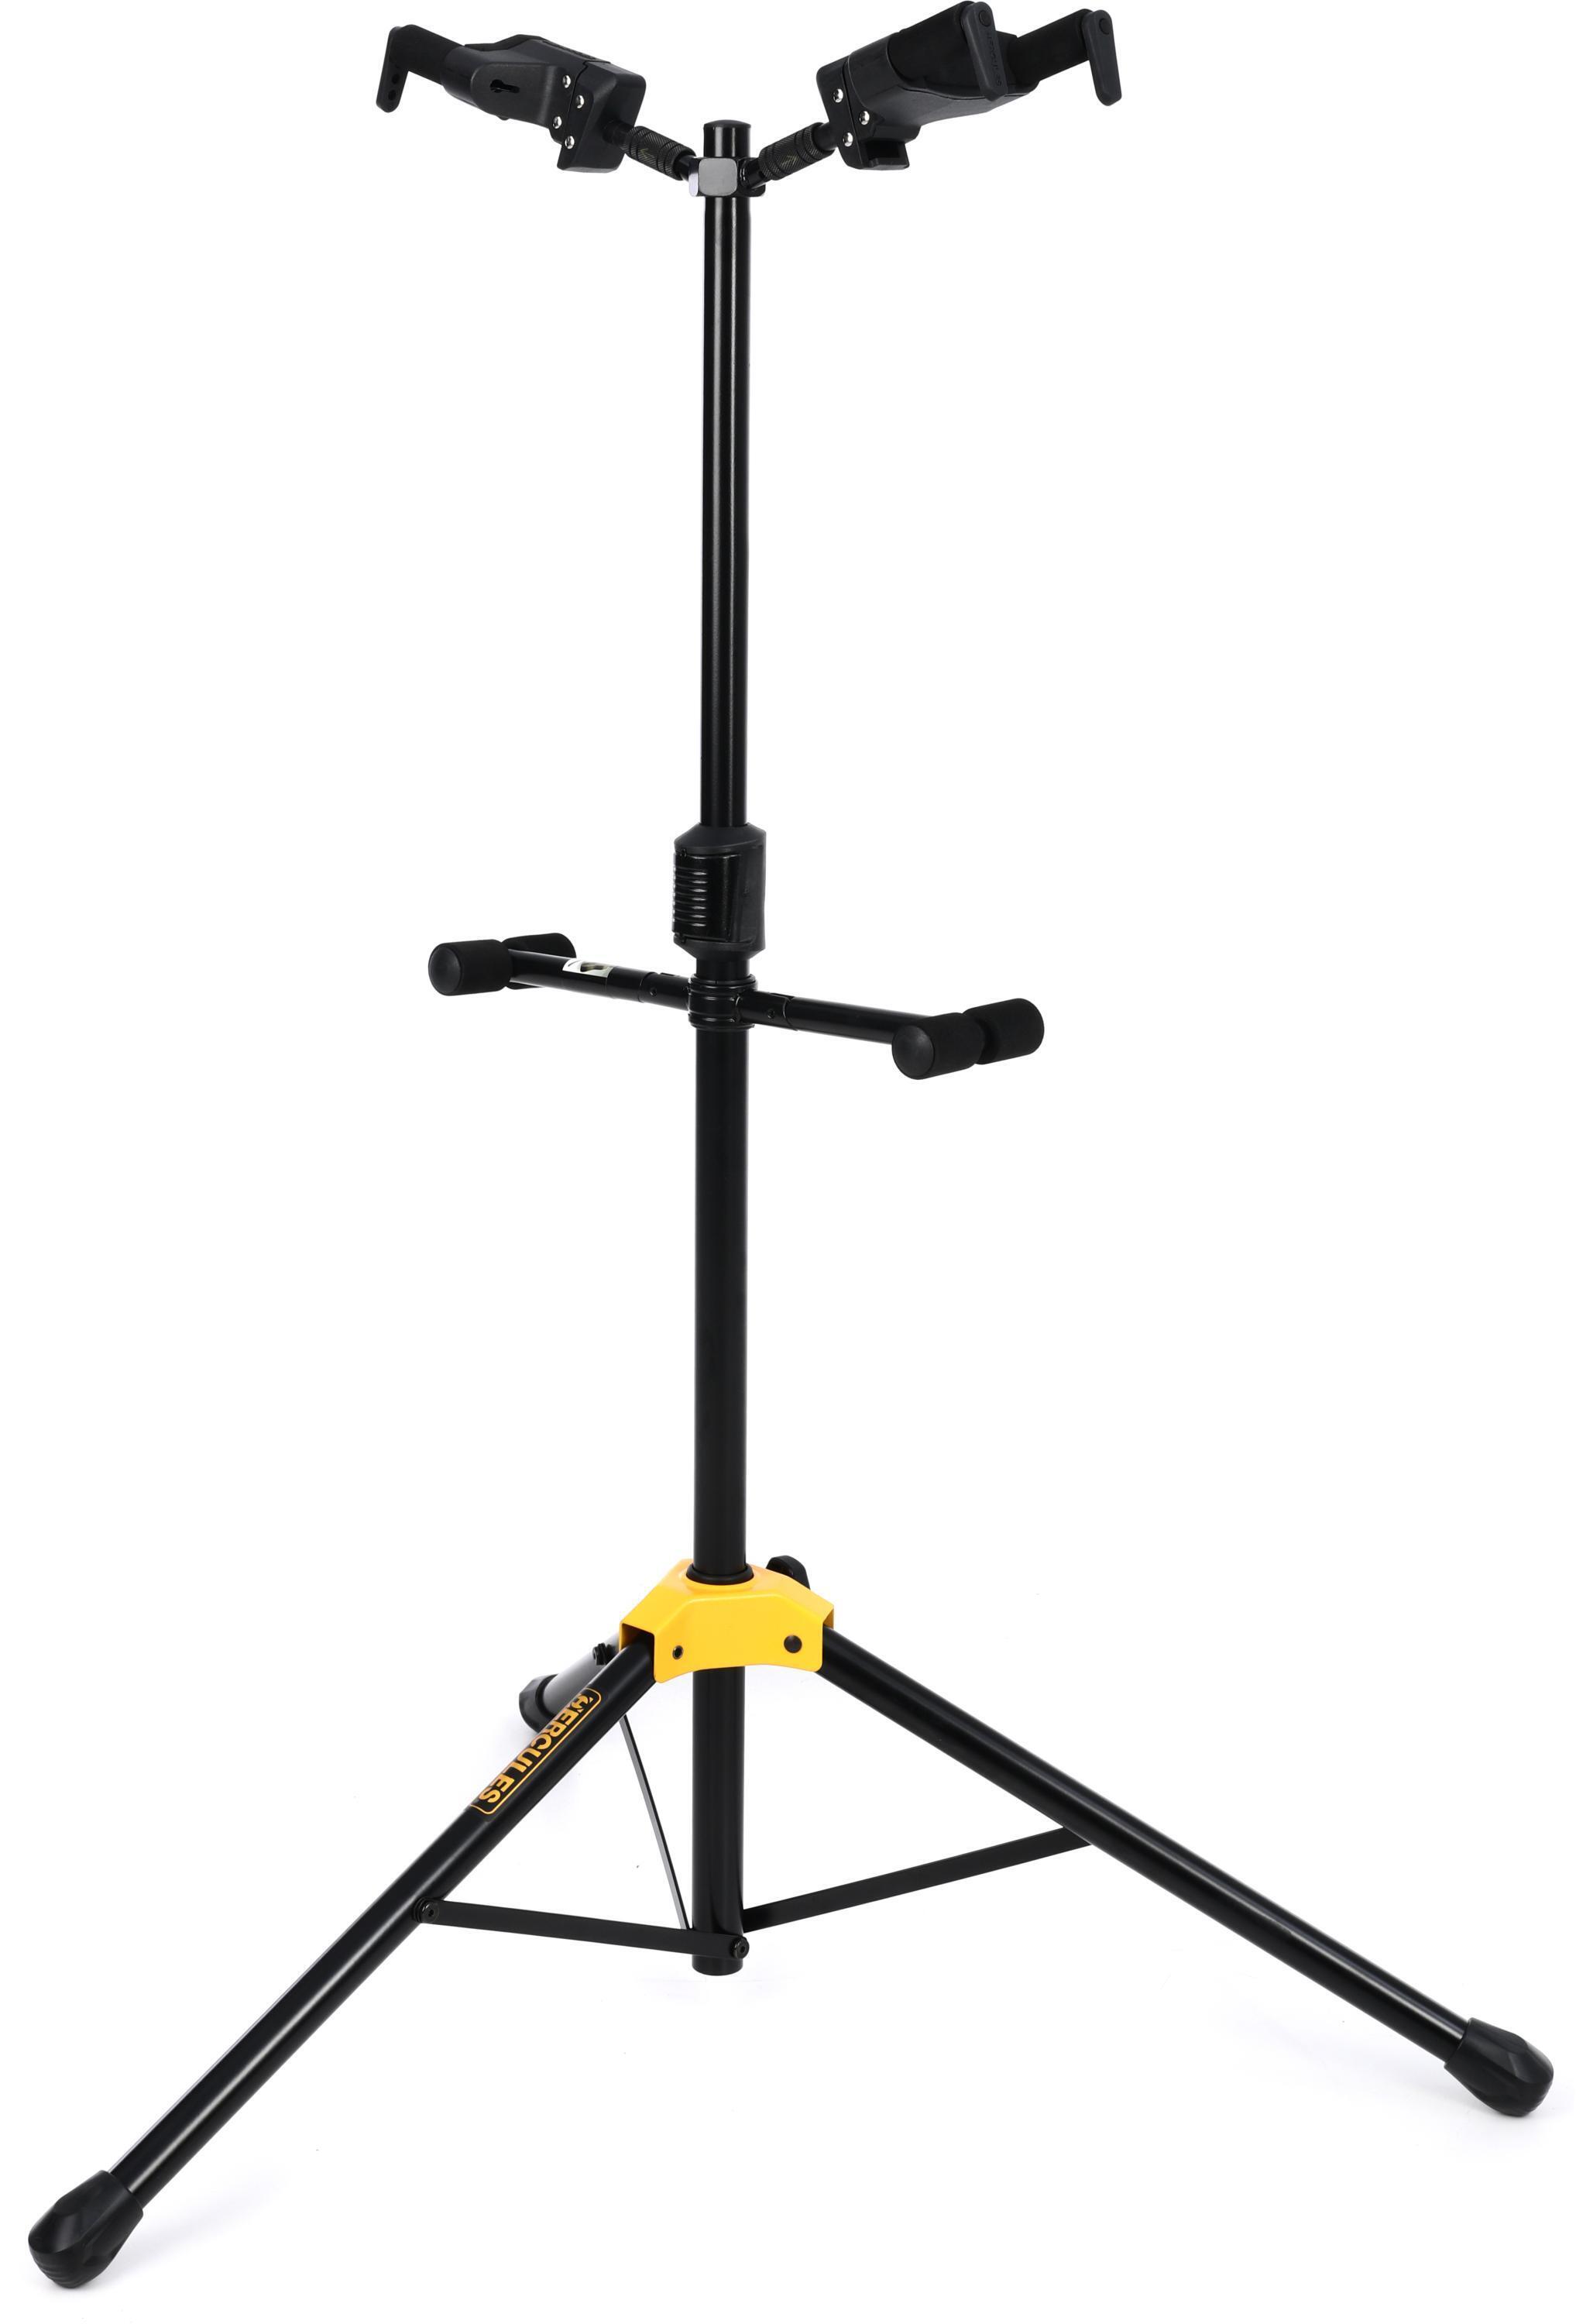 Hercules Stands GS422B PLUS Dual Guitar Stand with Auto Grip System and  Foldable Yoke